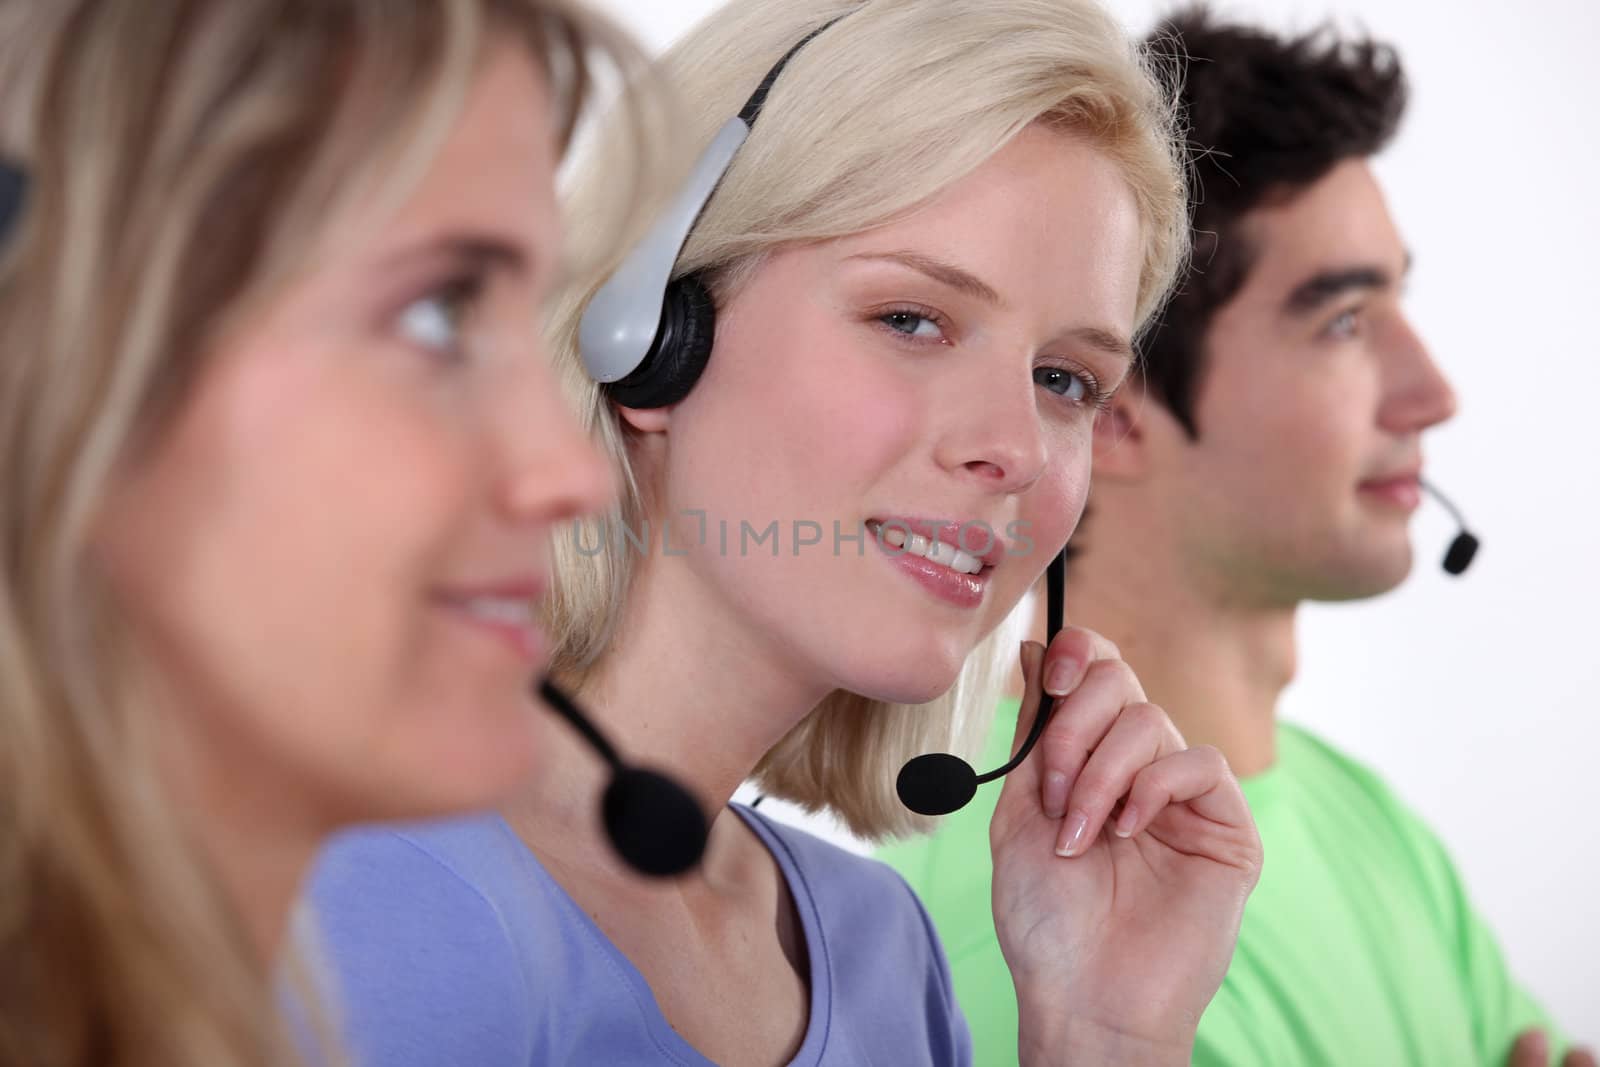 Employees in call center